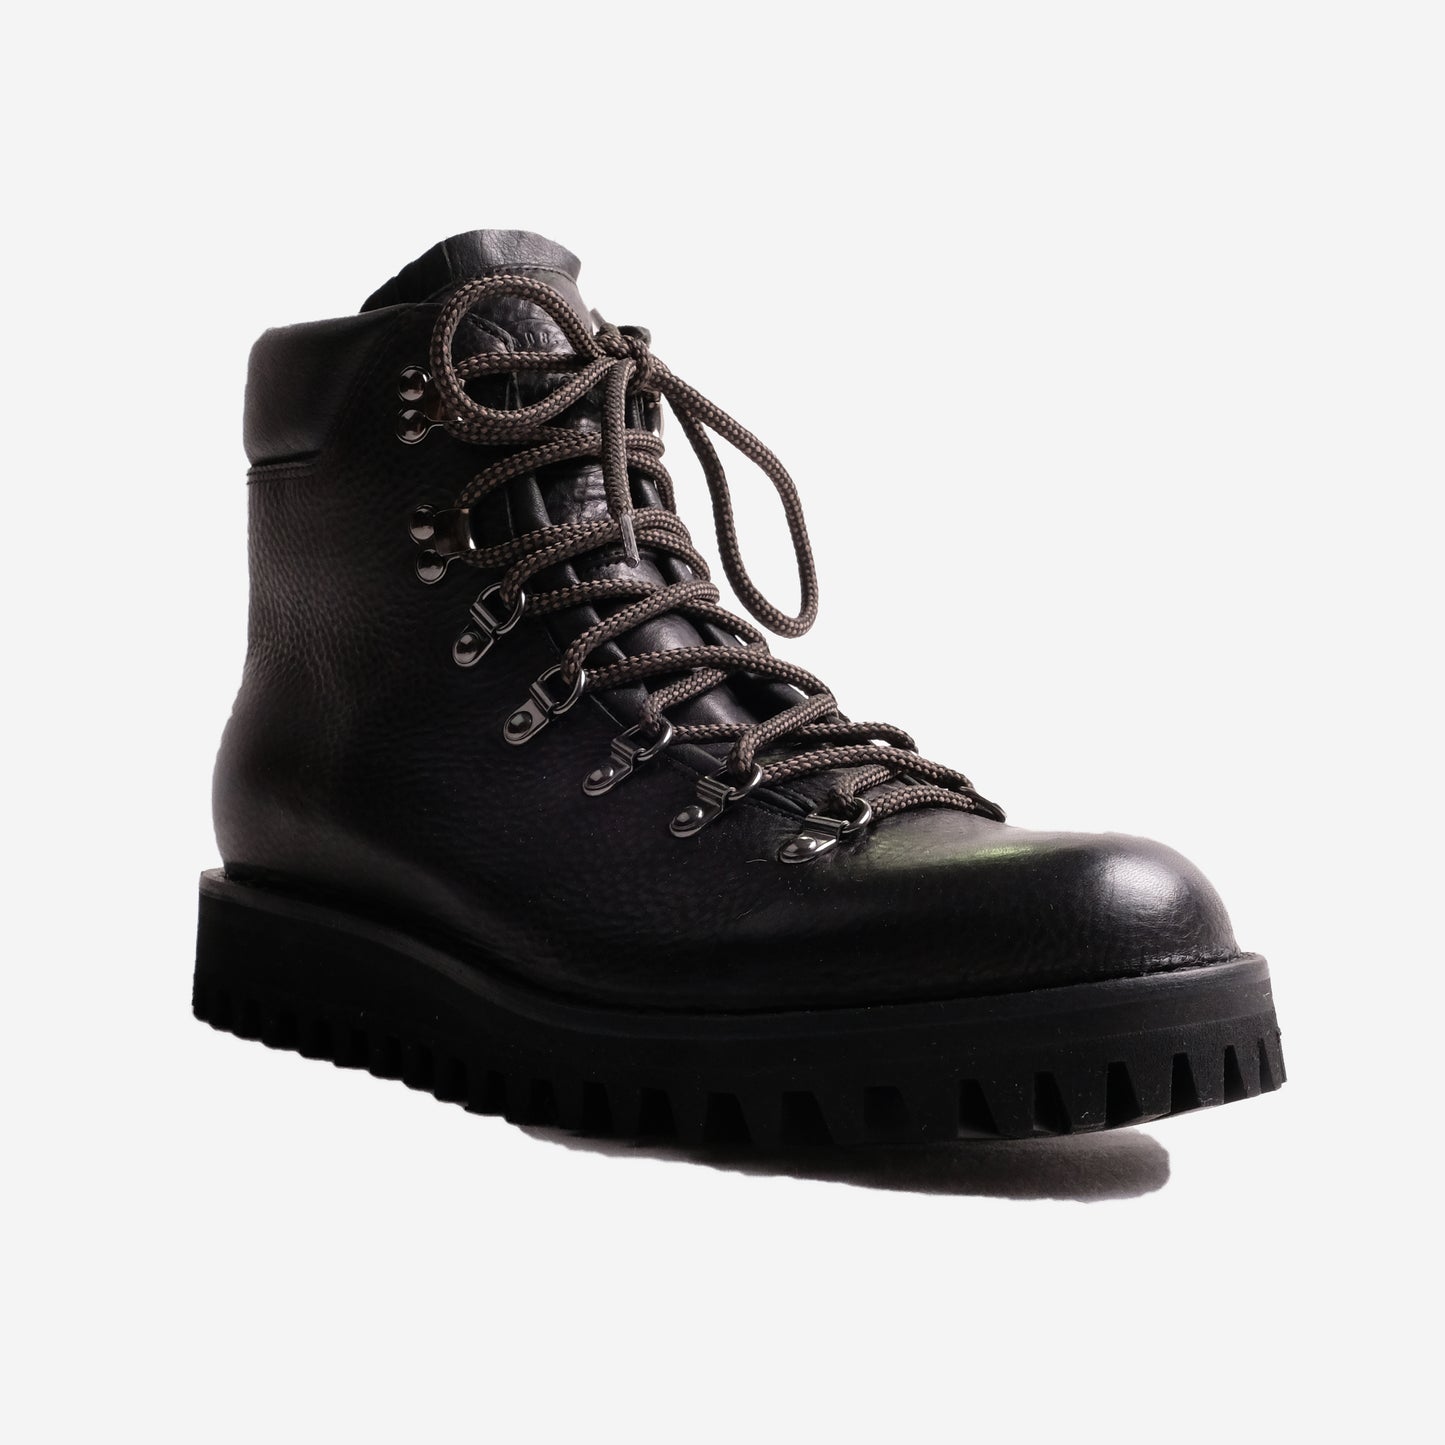 A300 Explorer Leather Hiking Boots - Pebbled Black